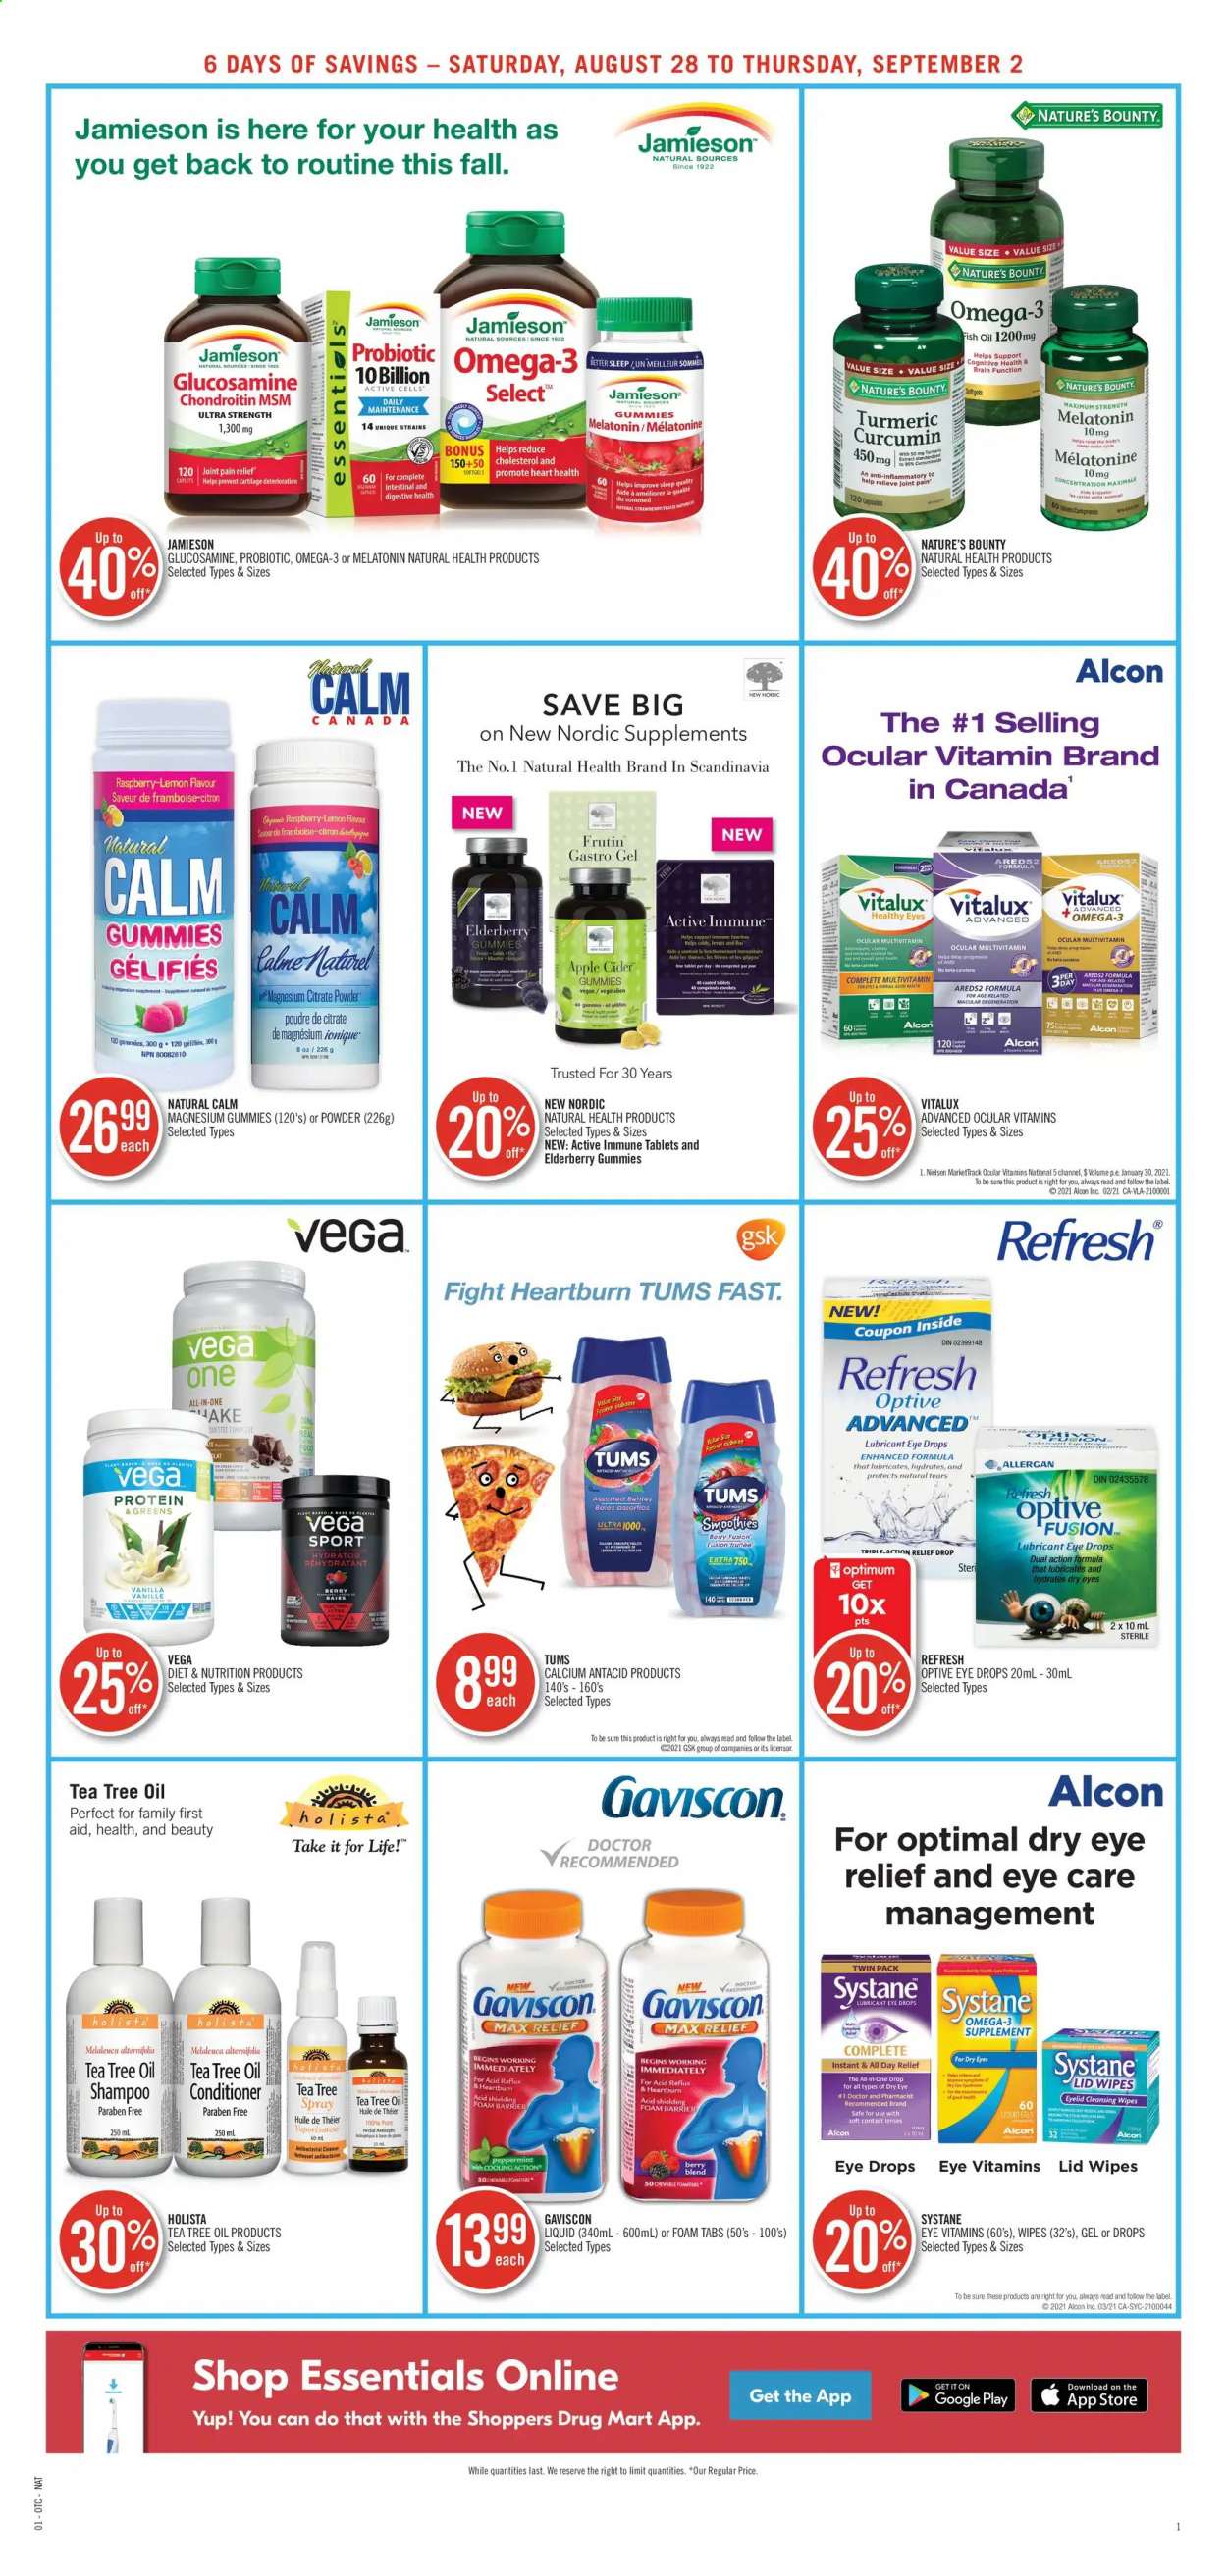 thumbnail - Shoppers Drug Mart Flyer - August 28, 2021 - September 02, 2021 - Sales products - turmeric, oil, smoothie, tea, cleansing wipes, wipes, cleanser, conditioner, Sure, lubricant, pain relief, fish oil, glucosamine, magnesium, multivitamin, Nature's Bounty, Omega-3, eye drops, Gaviscon, Antacid, tea tree oil, lenses, contact lenses, shampoo, Systane. Page 4.